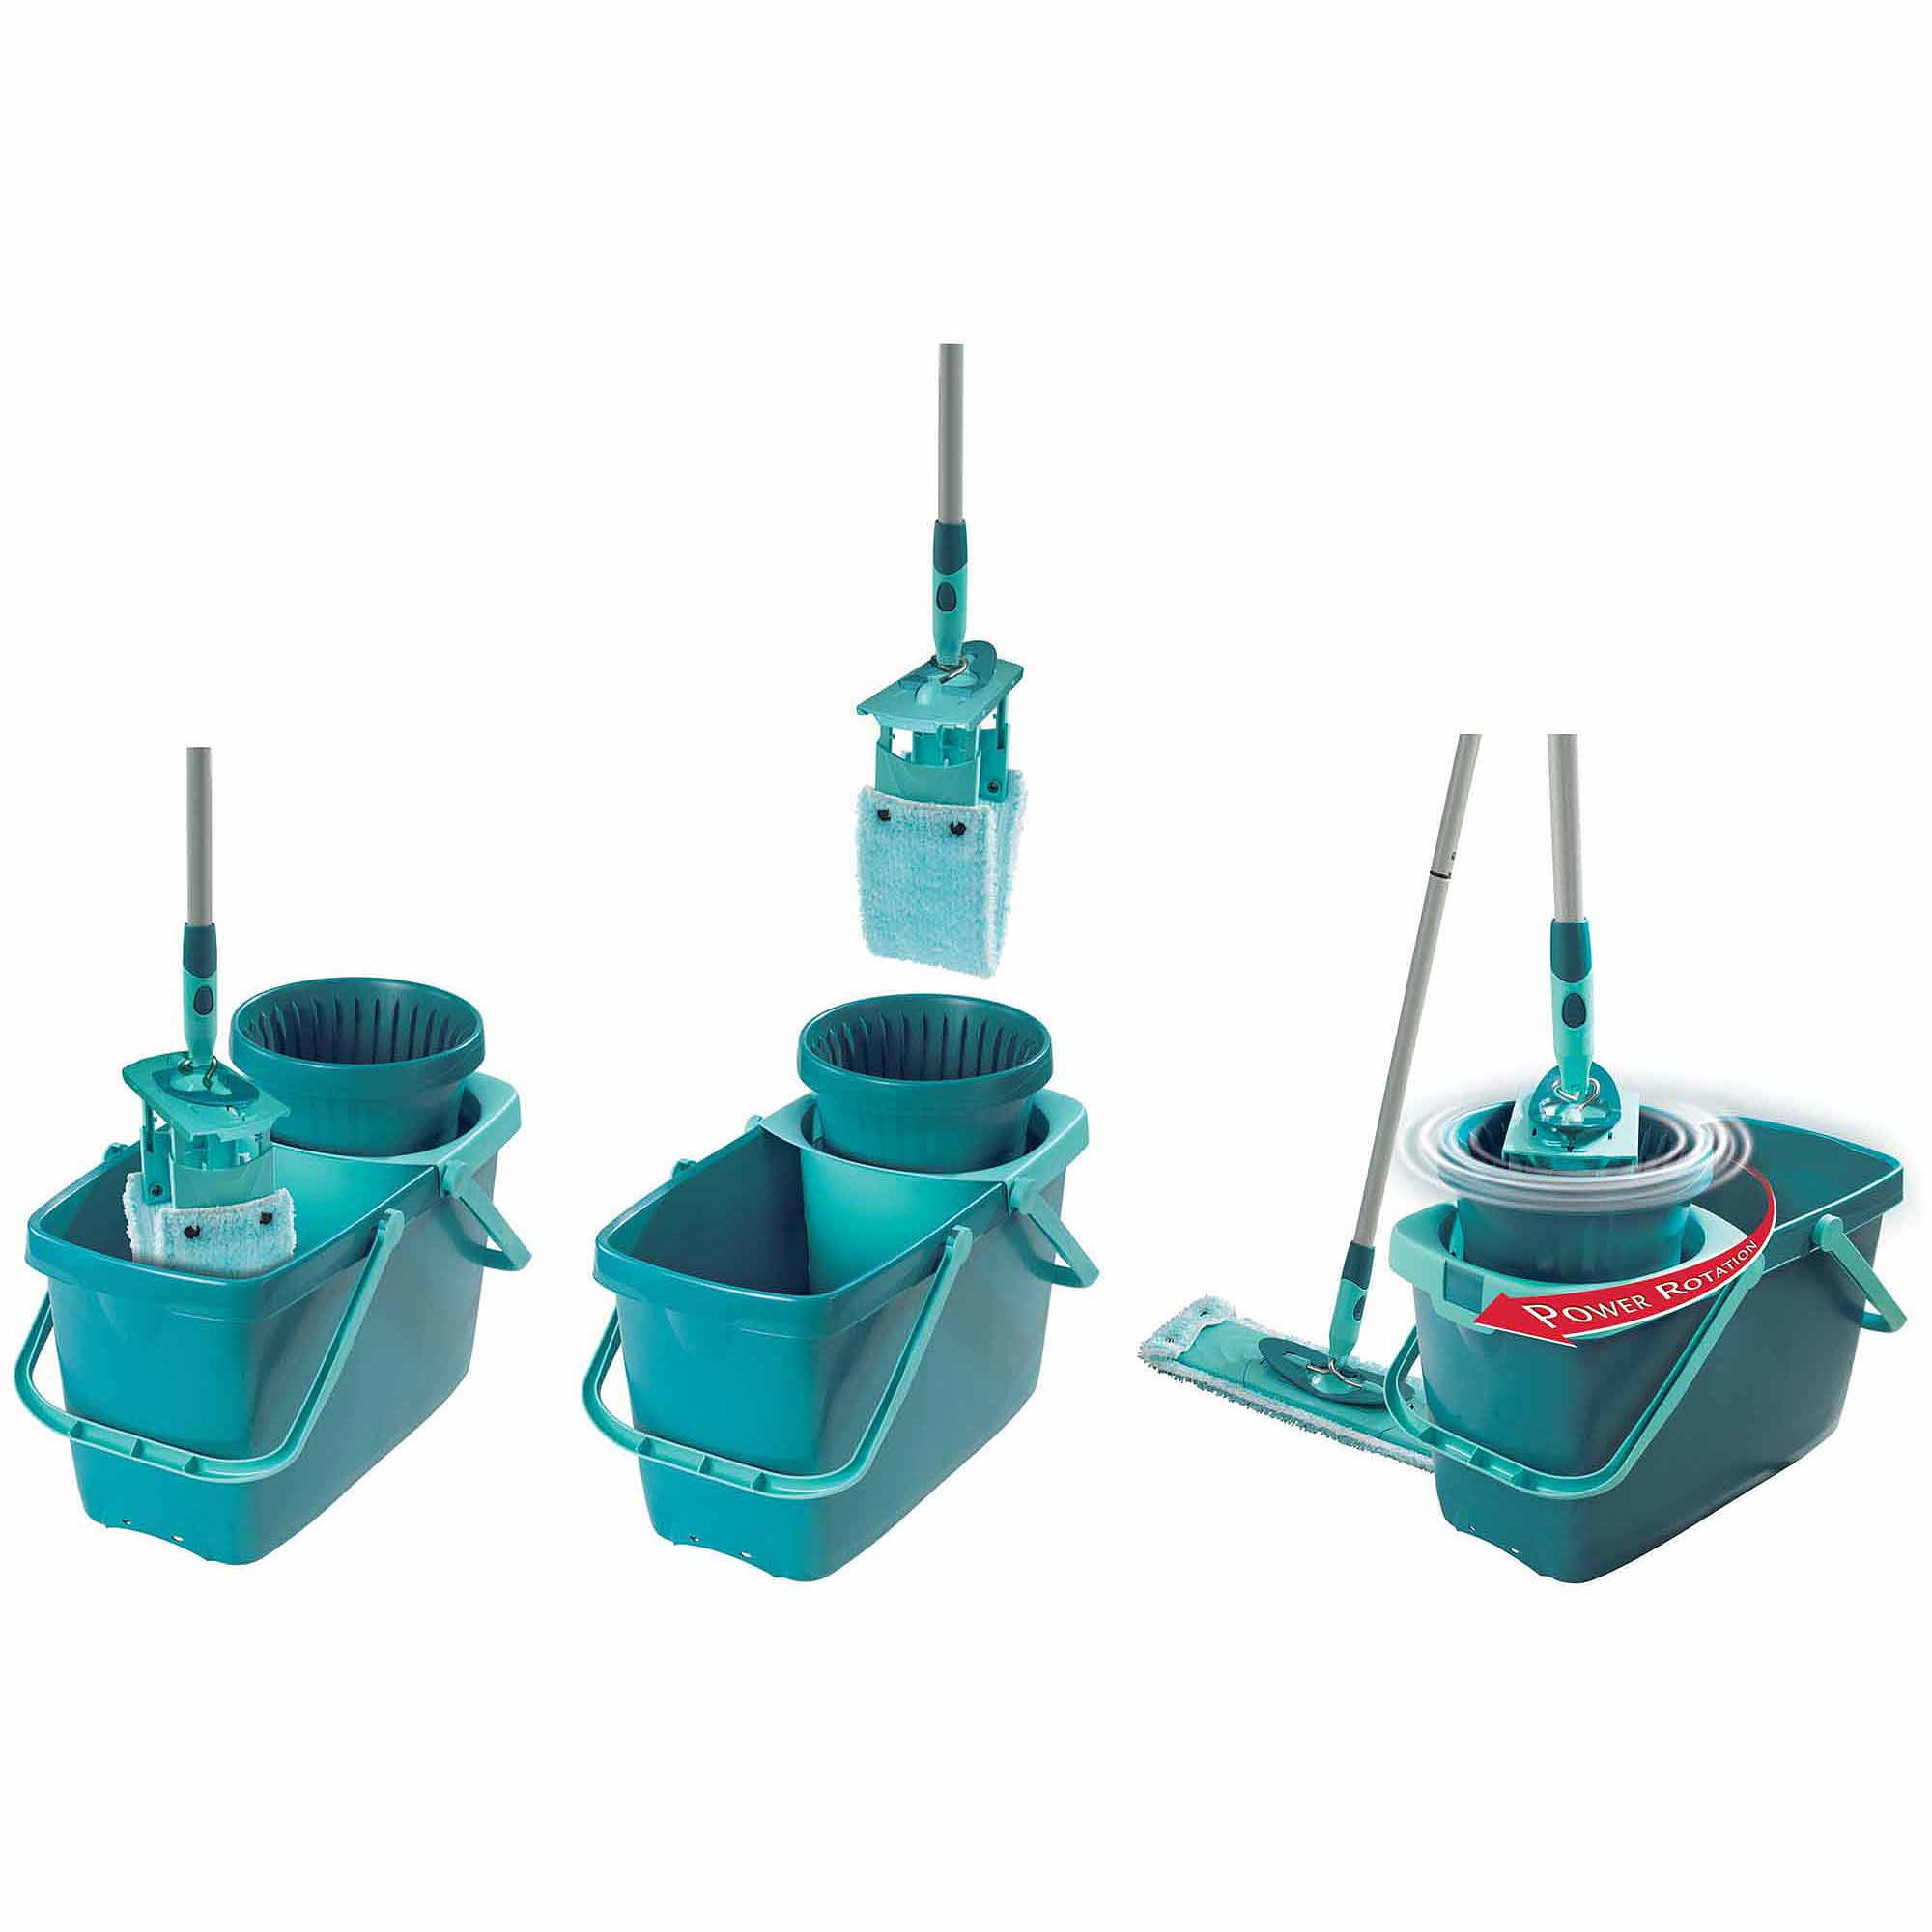 Leifheit Clean Twist Mop Set with Mop and Spin Bucket Turquoise 